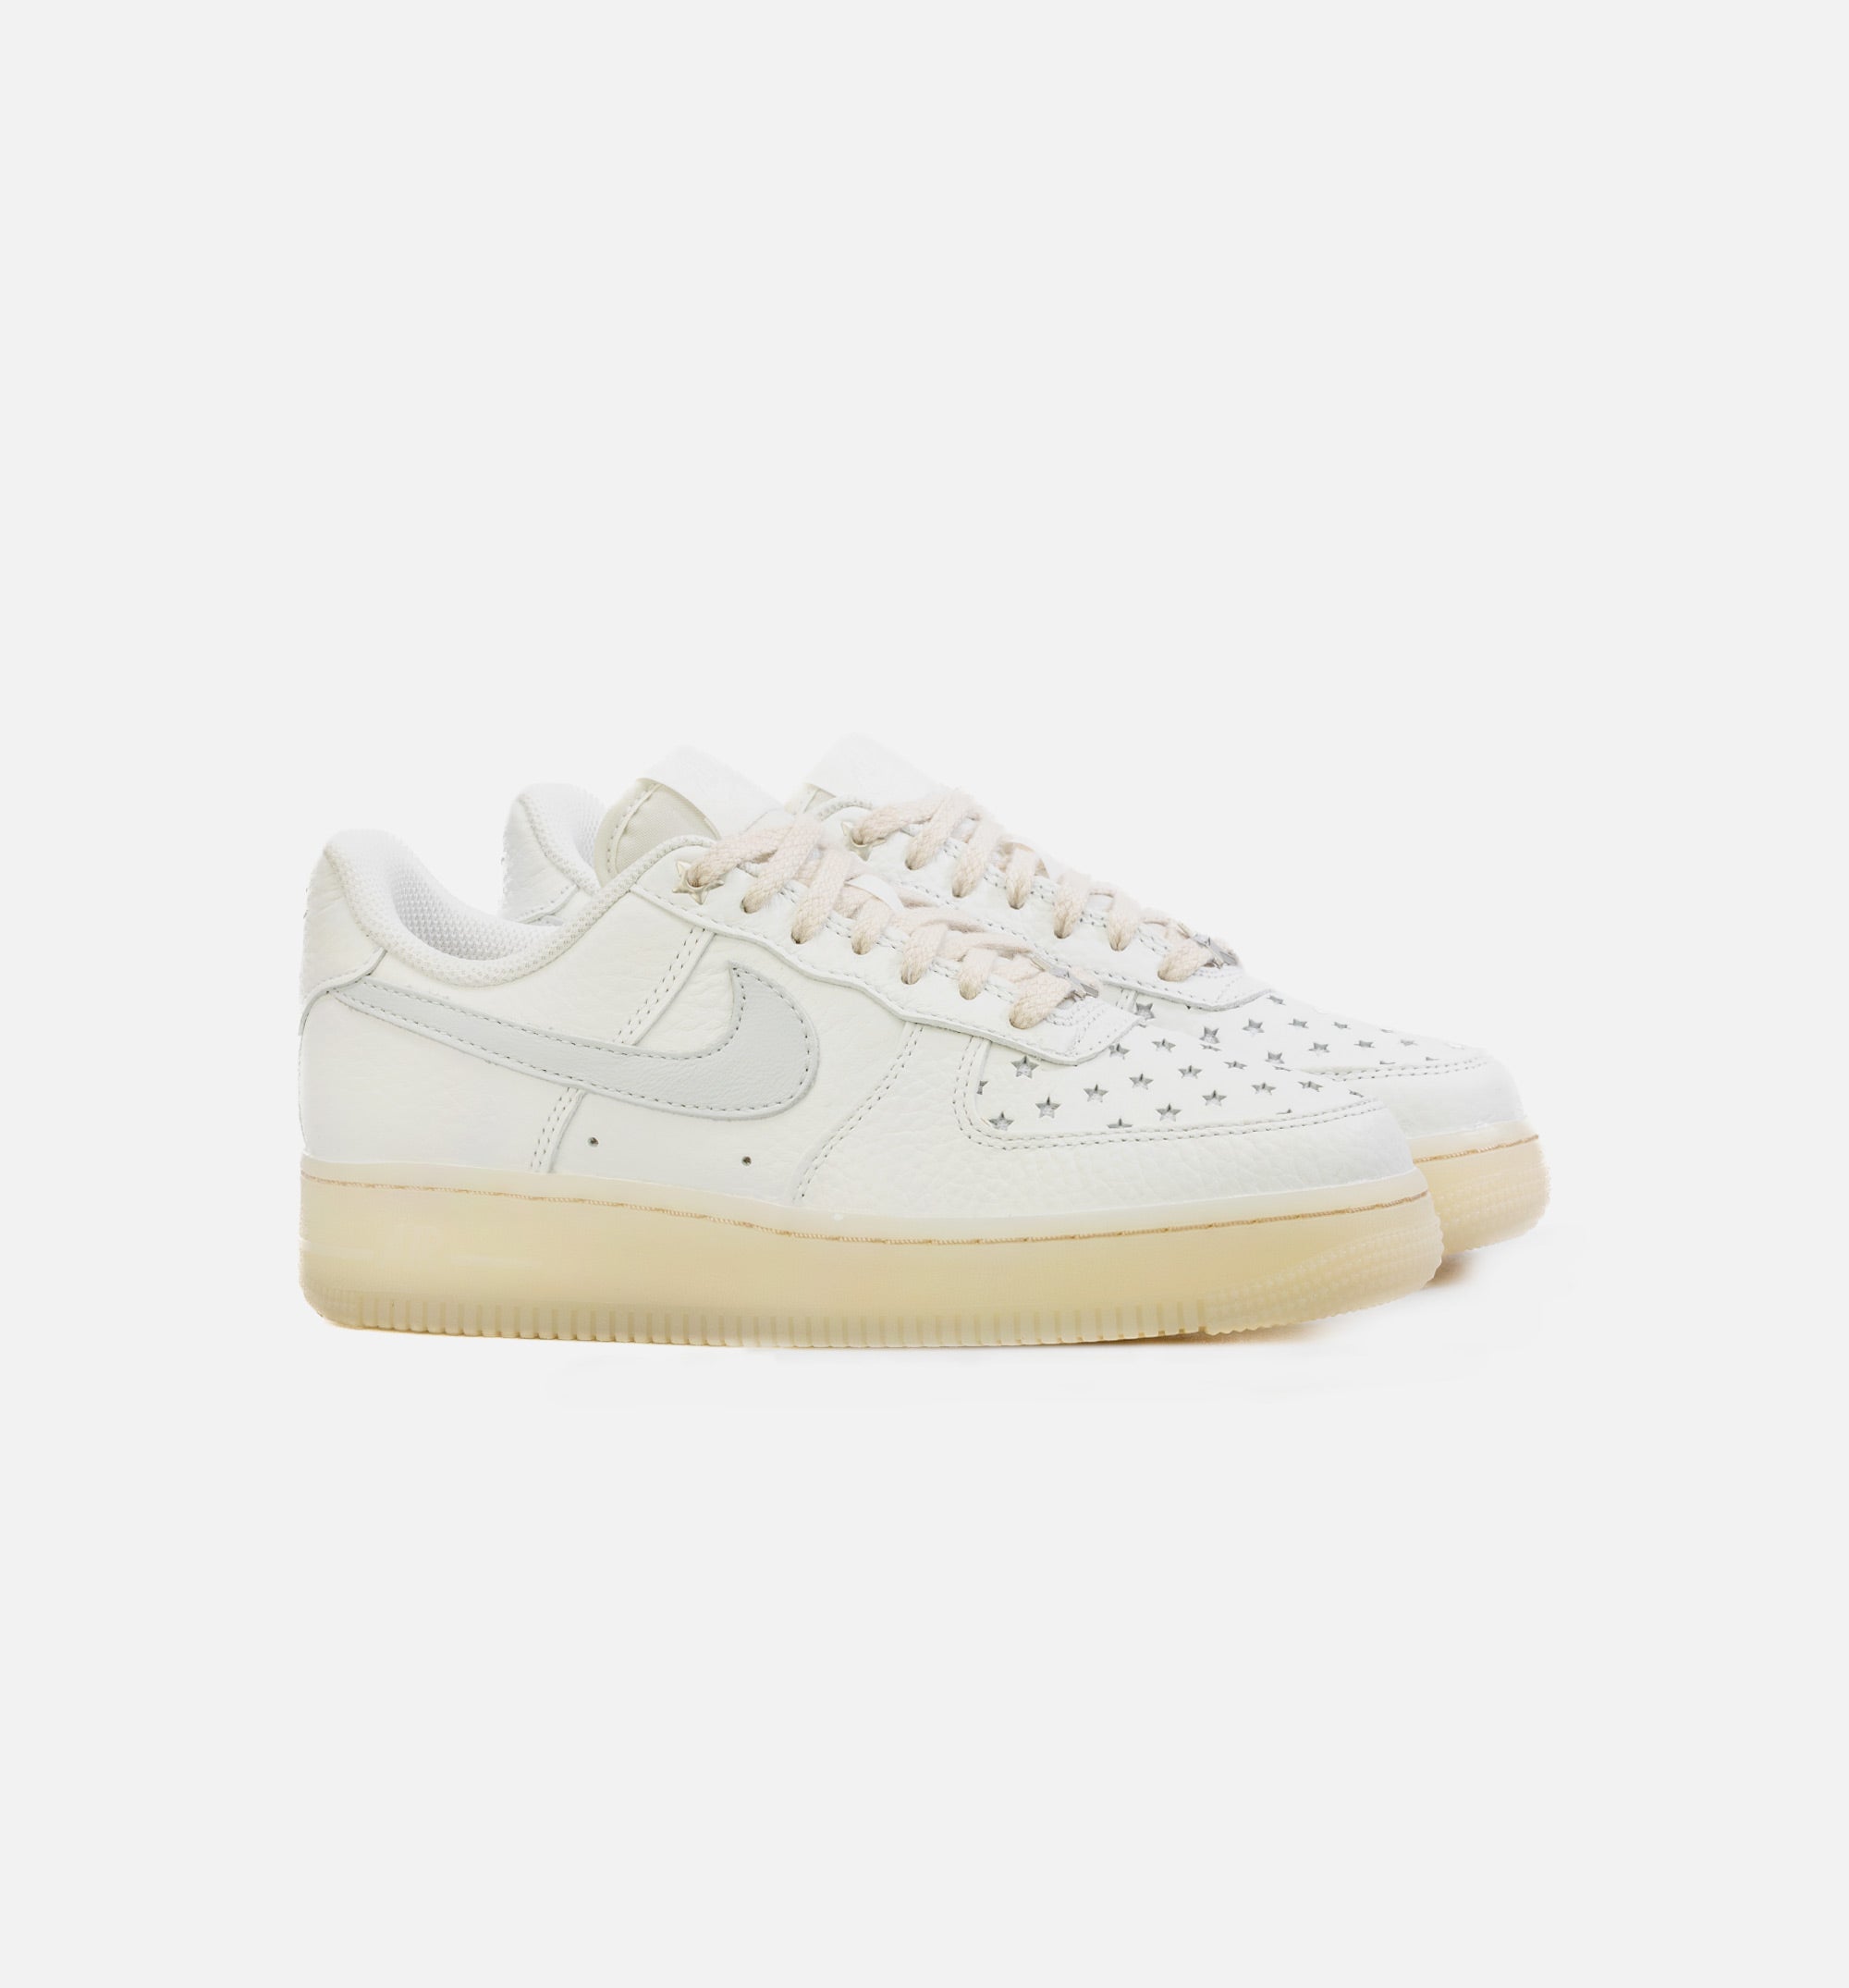 Nike FD0793-100 Air Force 1 Low Stars Womens Lifestyle Shoe